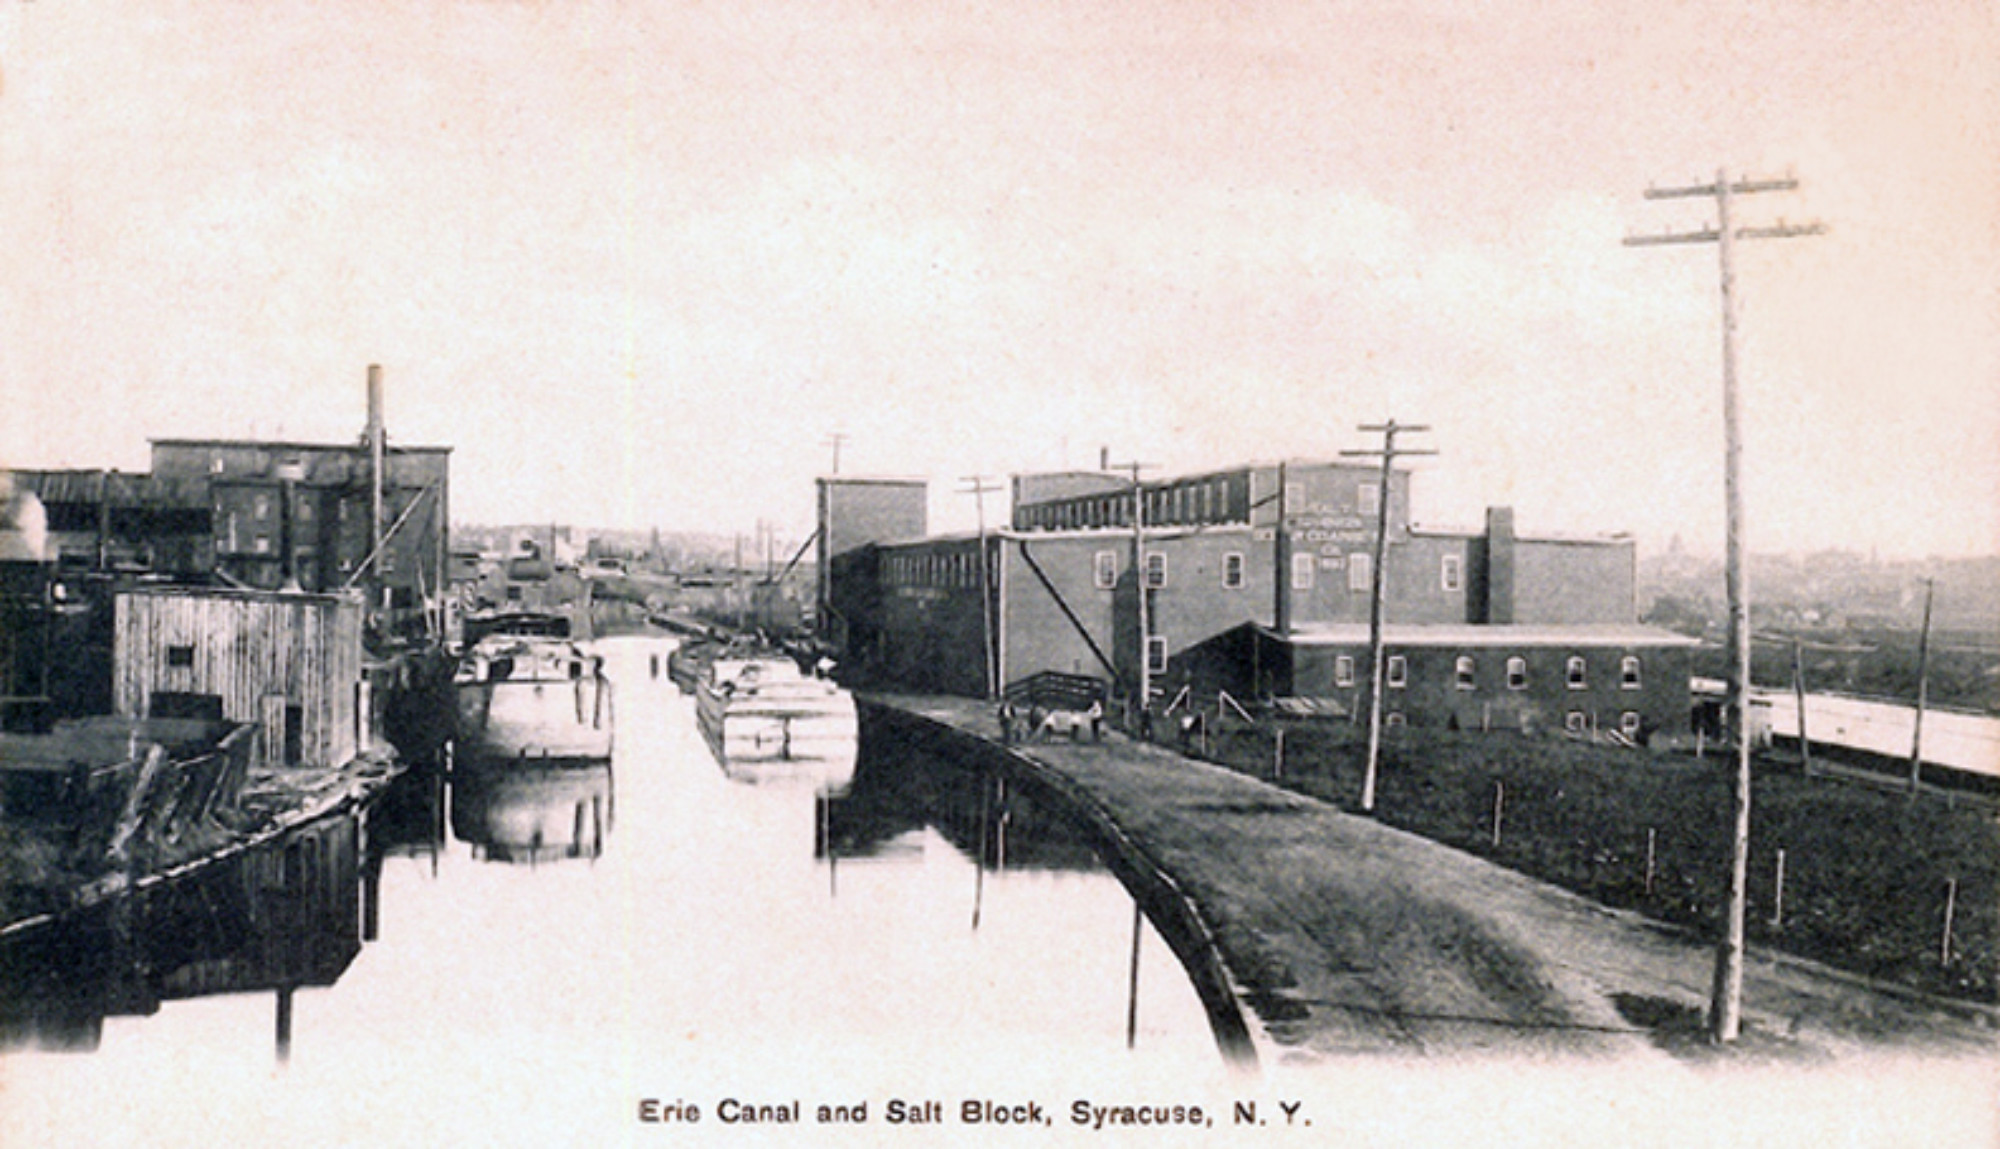 Old black and white photos of buildings along the Erie Canal